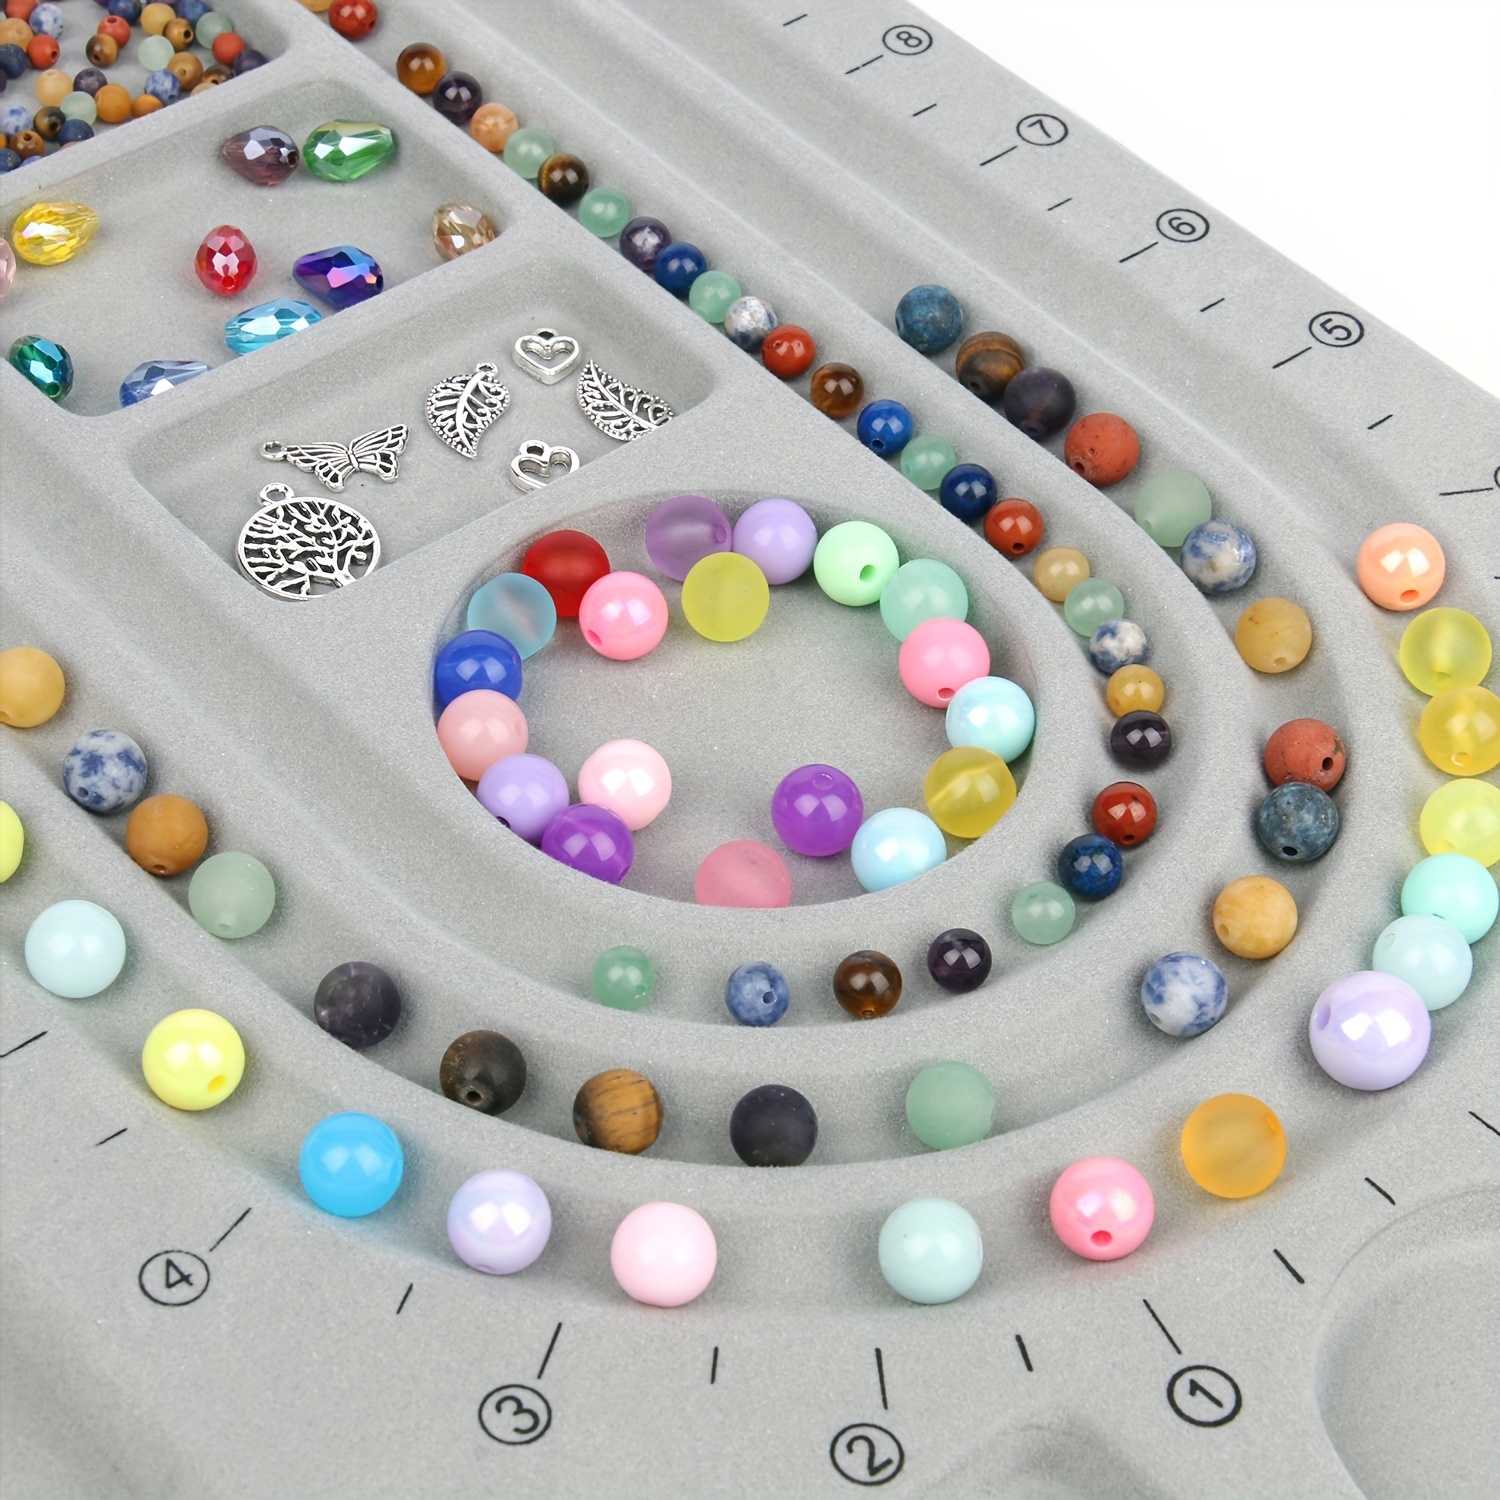 Plastic Bead Design Board, Bracelet Design, Basic Beading Board, for Jewelry  Making, Beading & Crafting, Measure Beads and Jewelry Pieces 